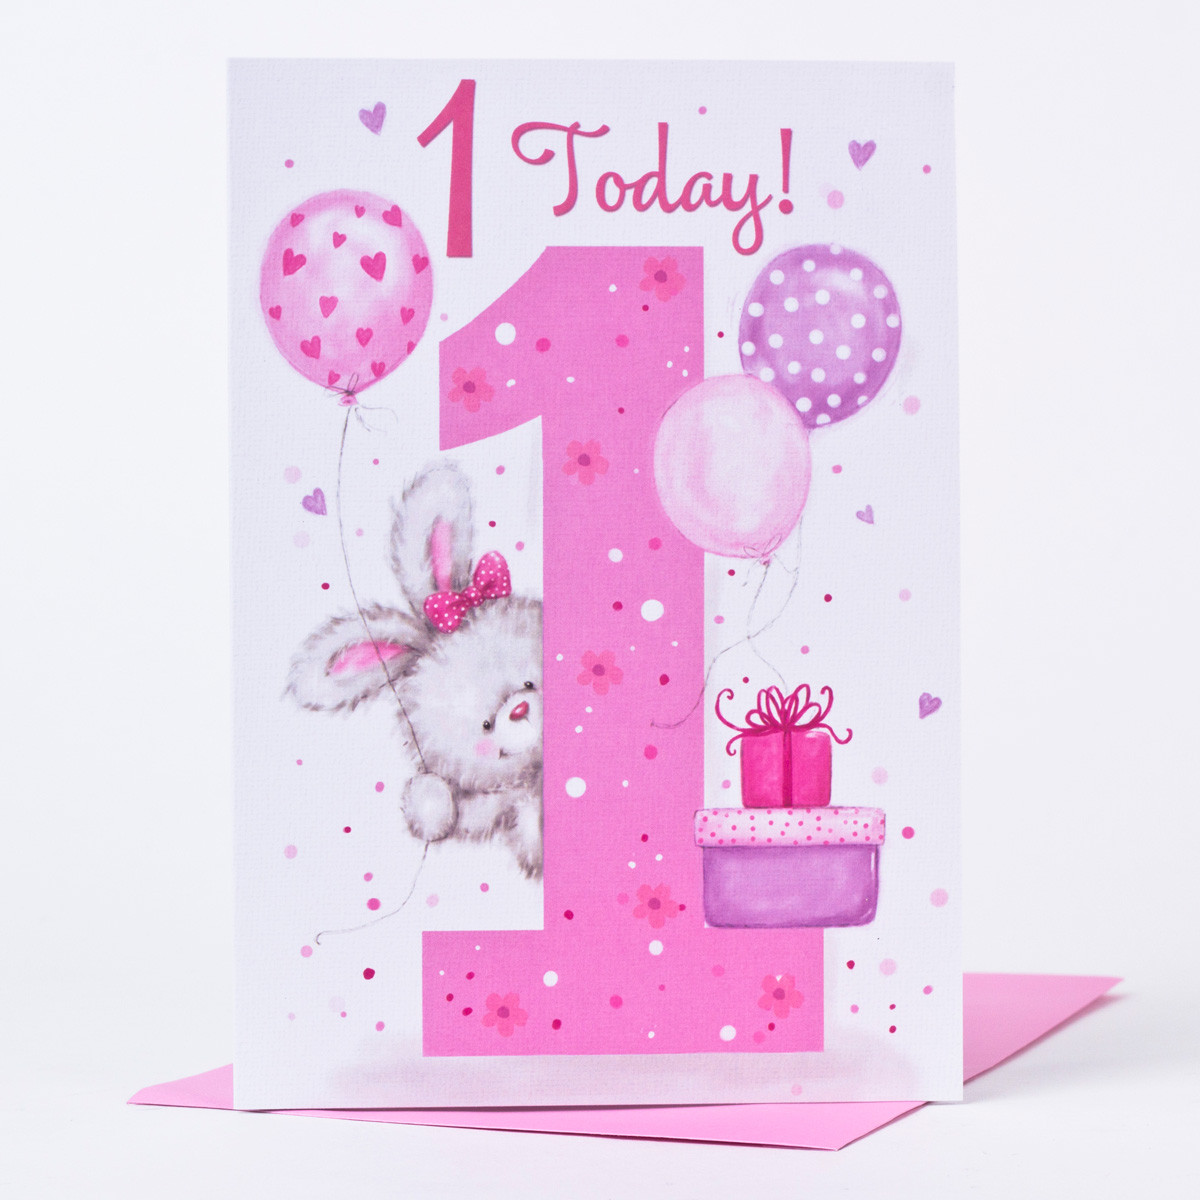 Best ideas about 1st Birthday Card
. Save or Pin 1st Birthday Card 1 Today Bunny Pink Now.